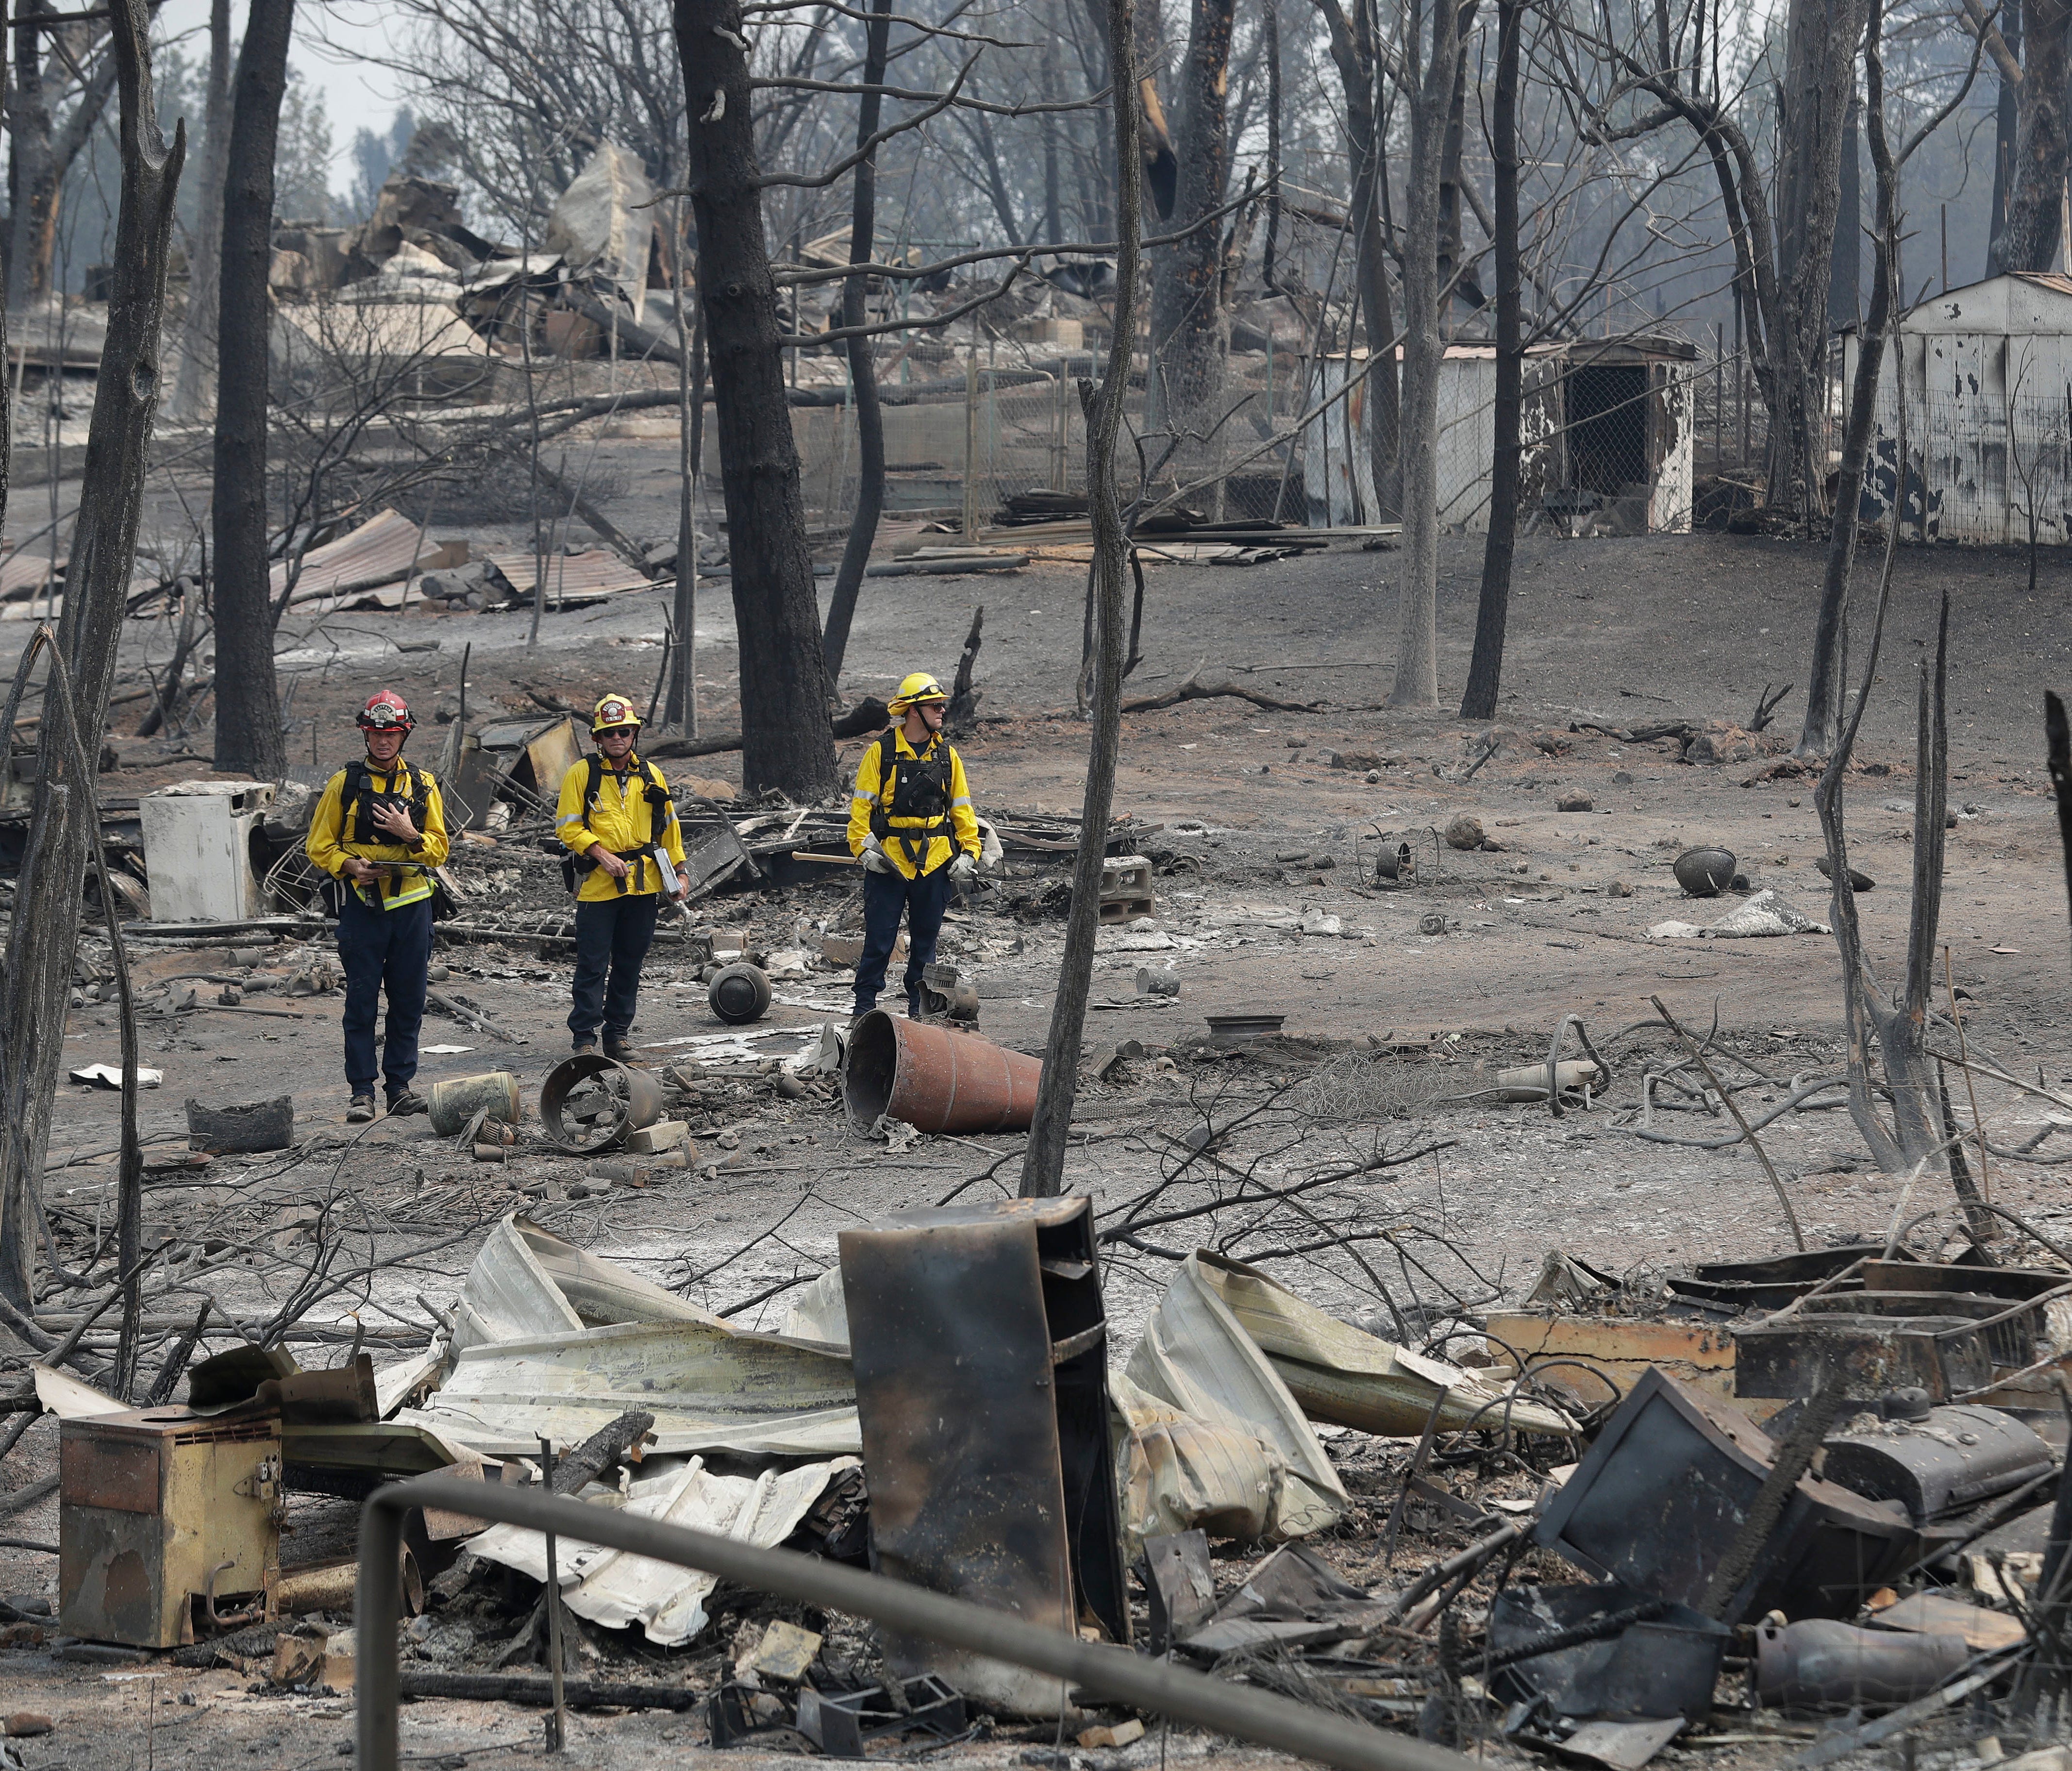 San Bernardino County Fire Department firefighters assess the damage to a neighborhood in the aftermath of a wildfire, on July 29, 2018, in Keswick, Calif.